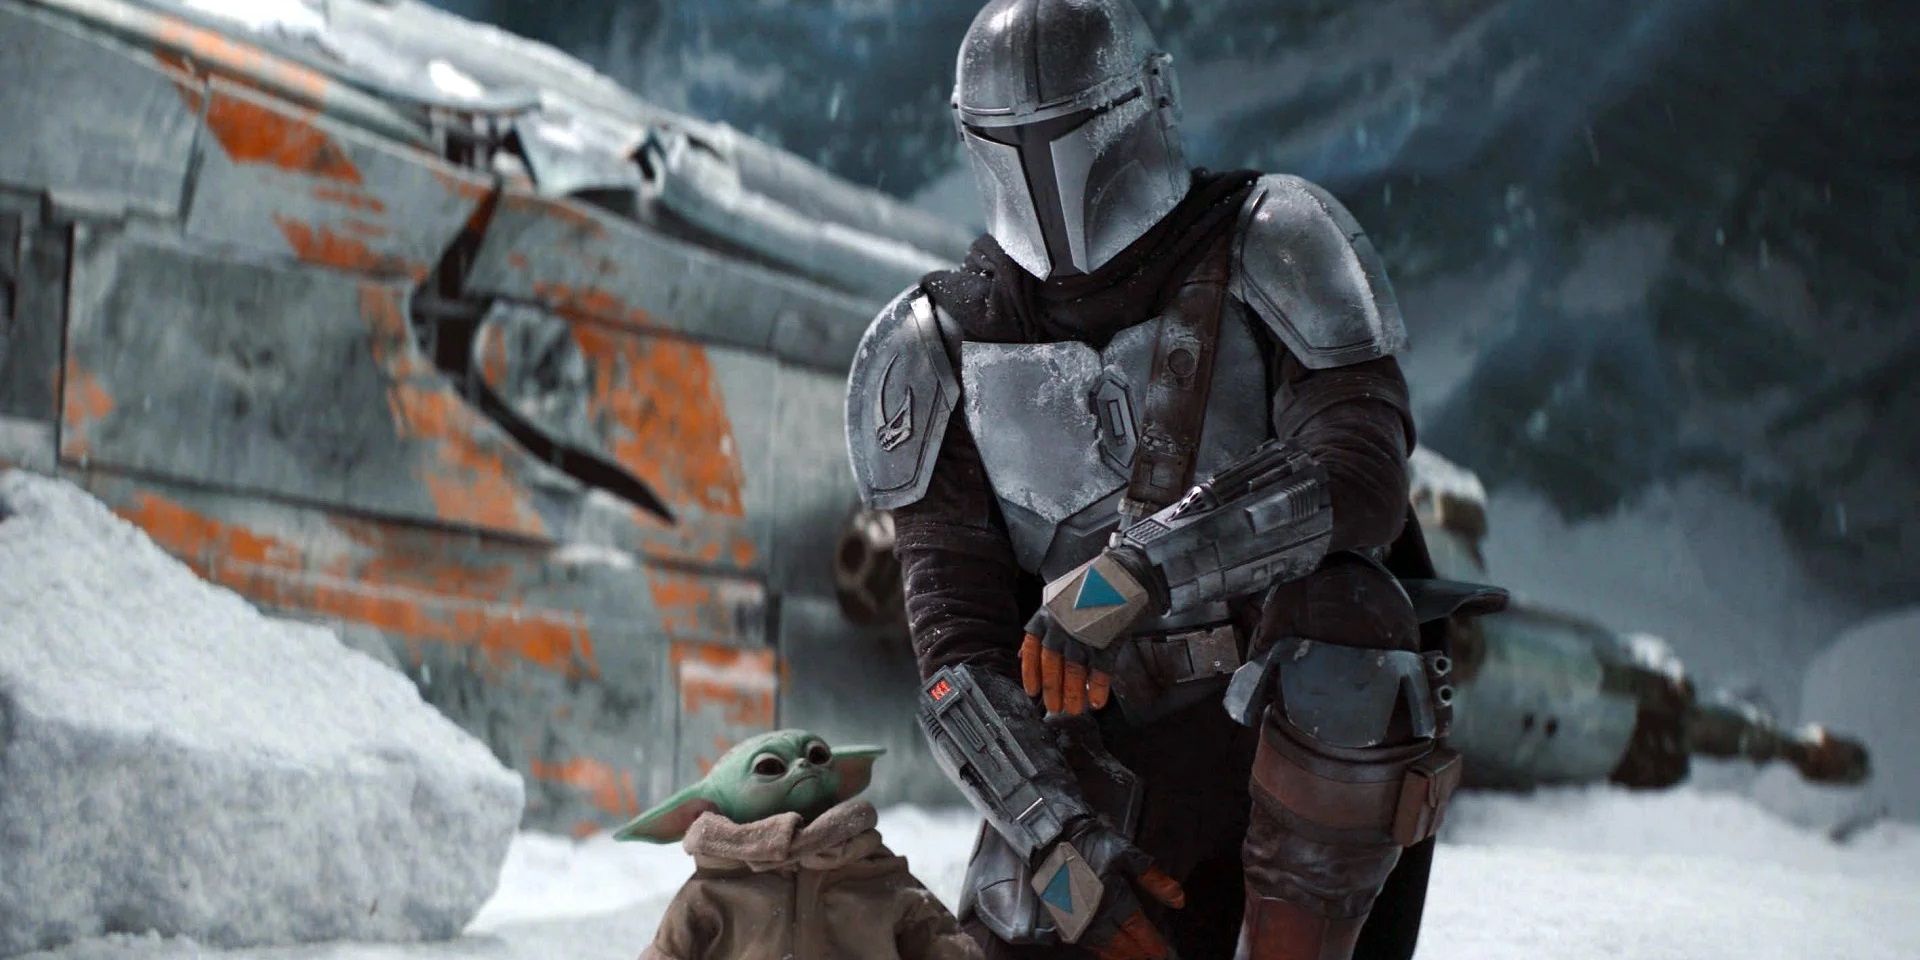 Din Djarin and Grogu next to the crashed Razor Crest in The Mandalorian (star wars)